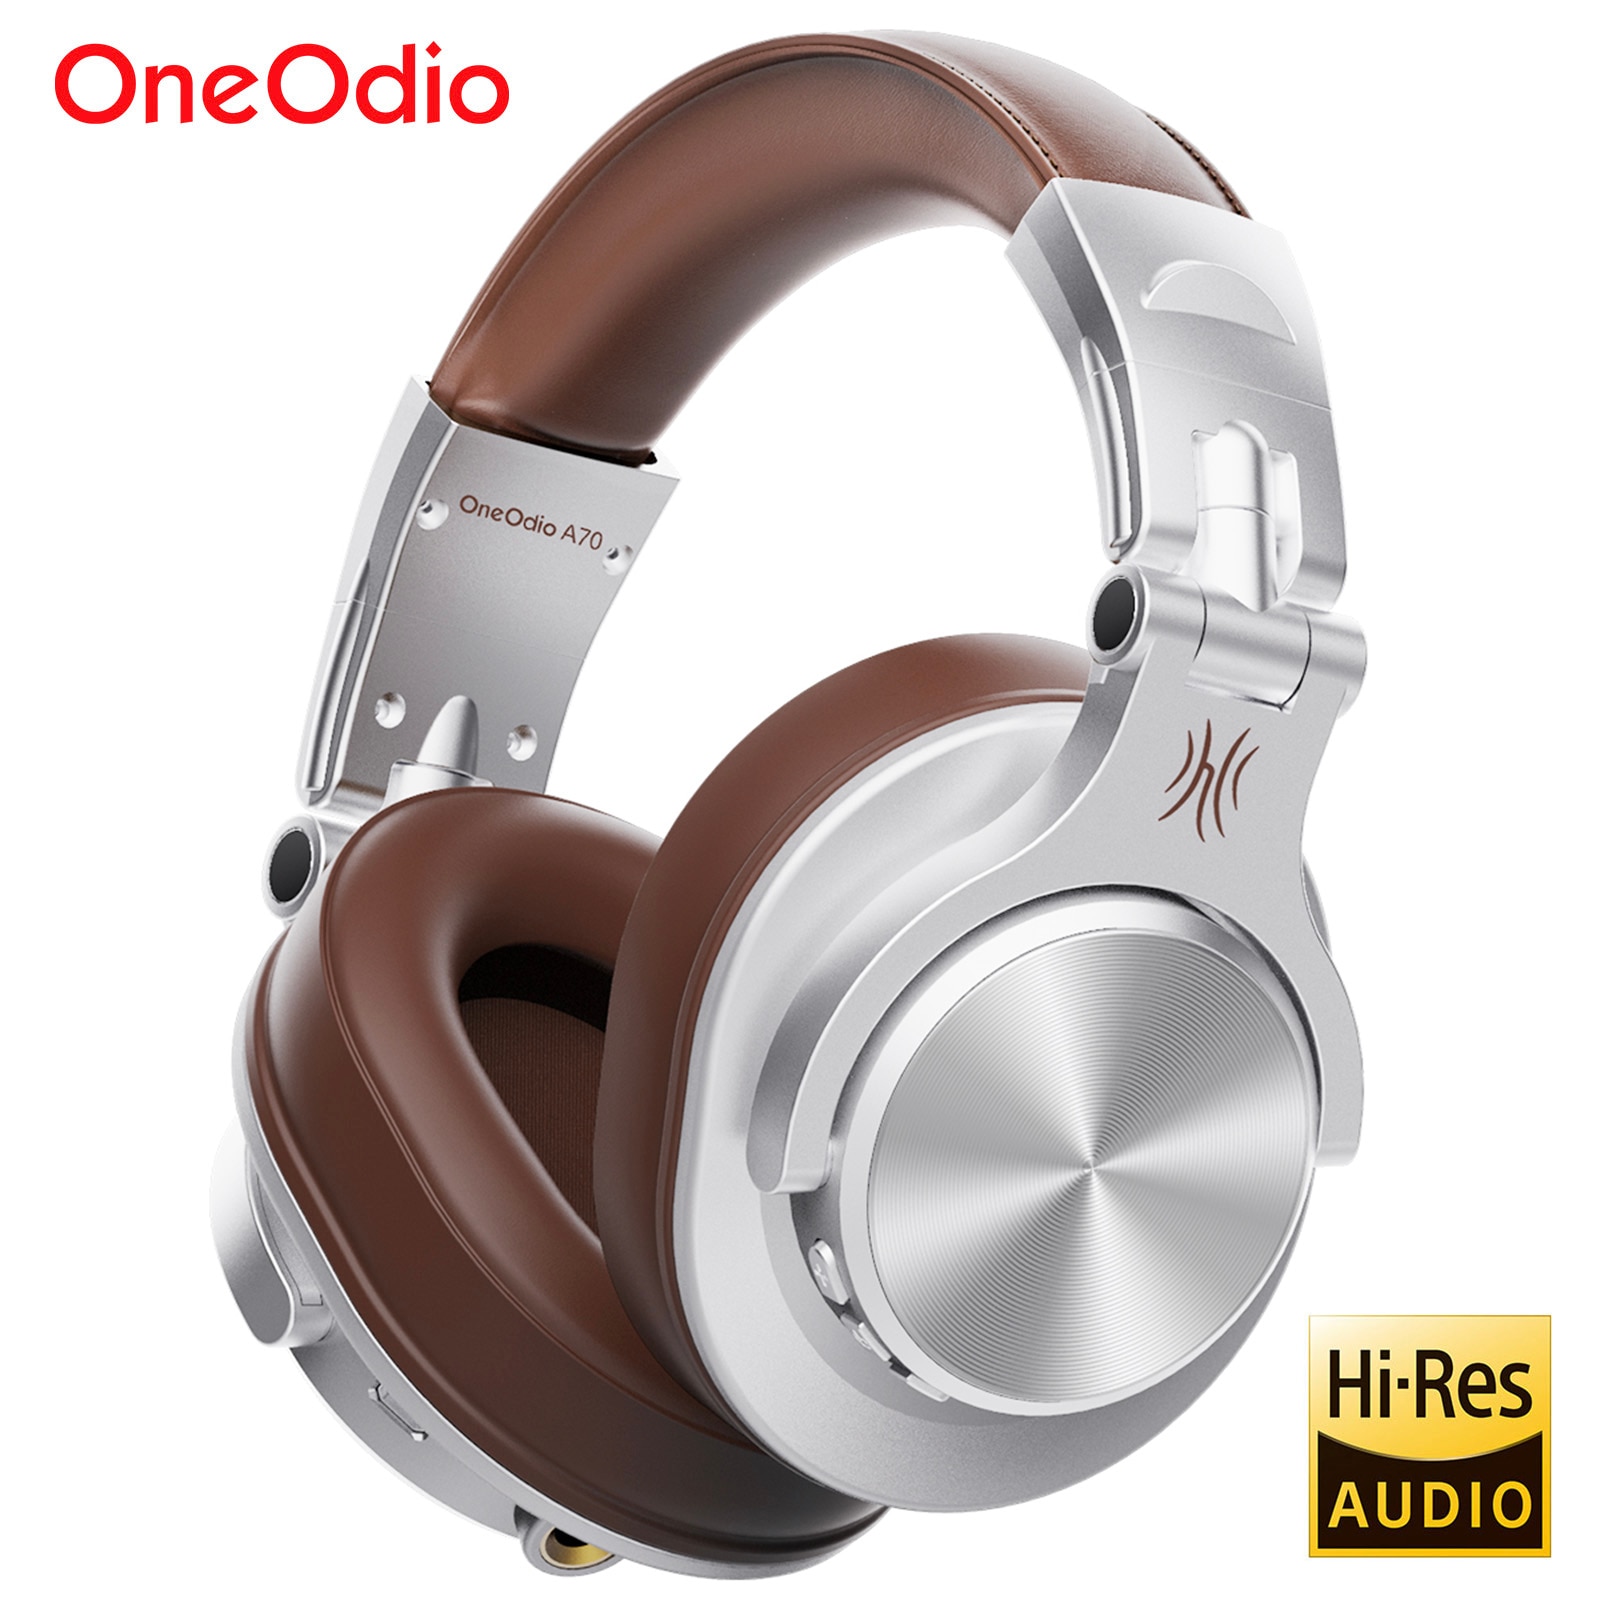 Oneodio A70 Fusion Wireless Headphones with Mic